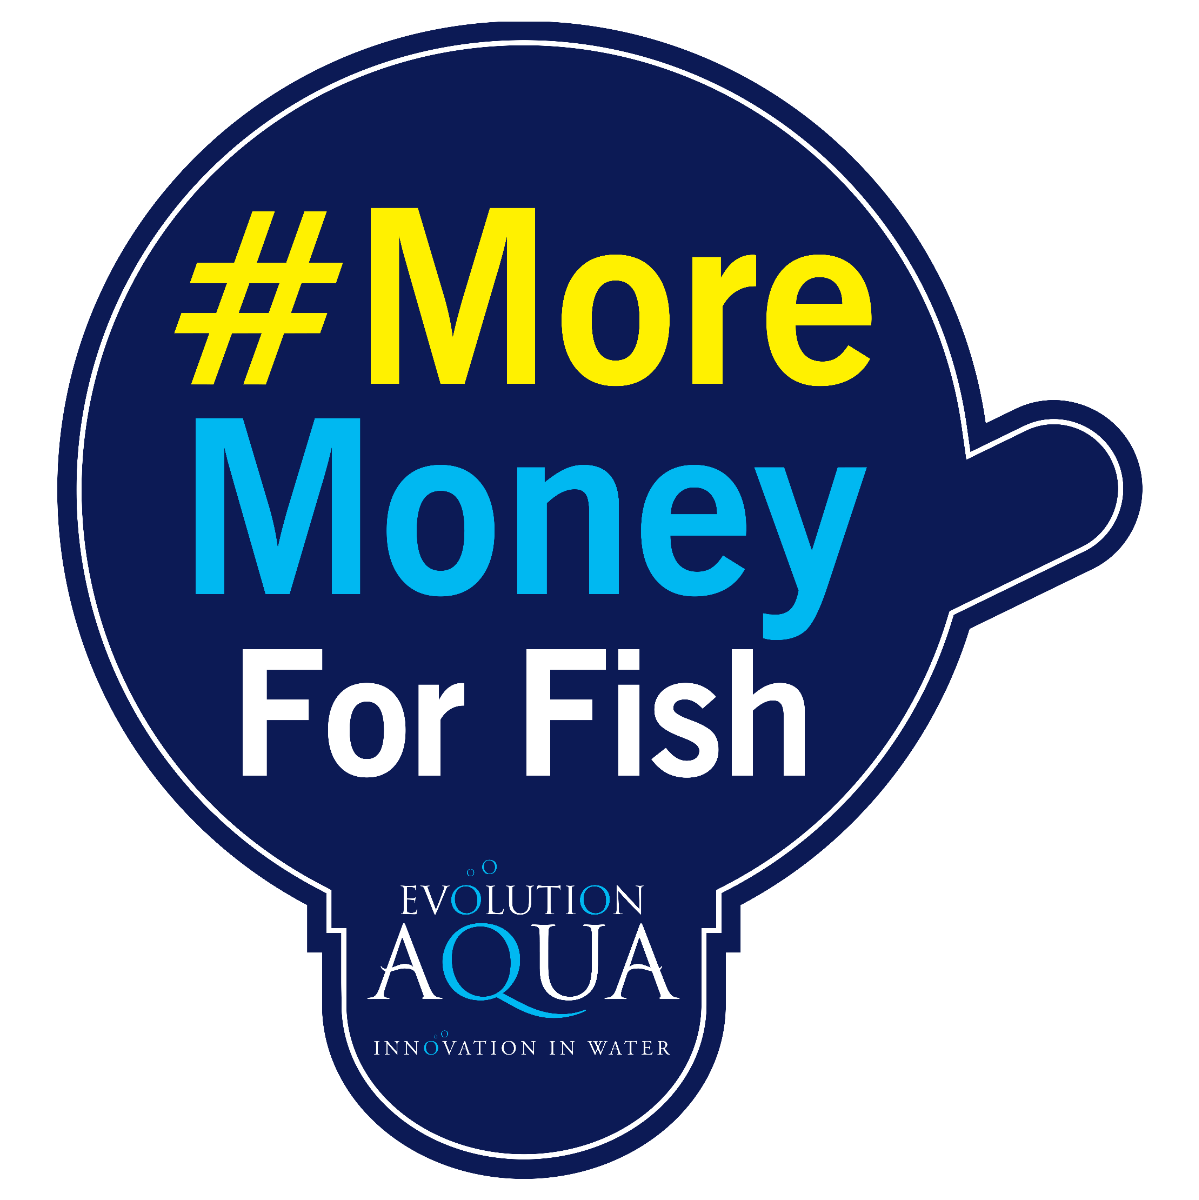 More Money For Fish campaign logo 